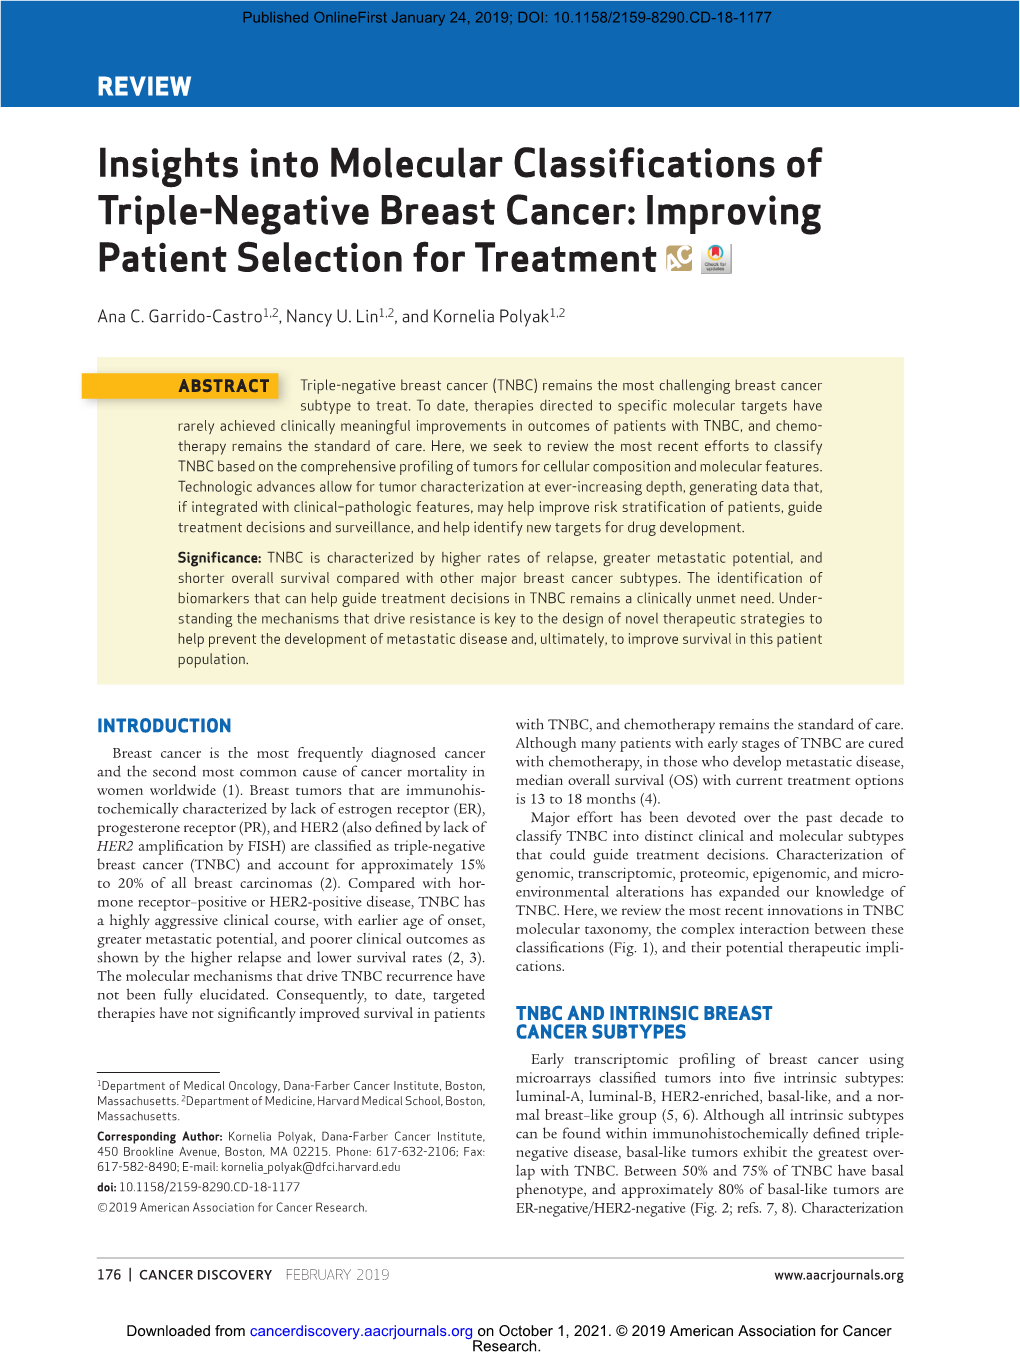 Insights Into Molecular Classifications of Triple-Negative Breast Cancer: Improving Patient Selection for Treatment